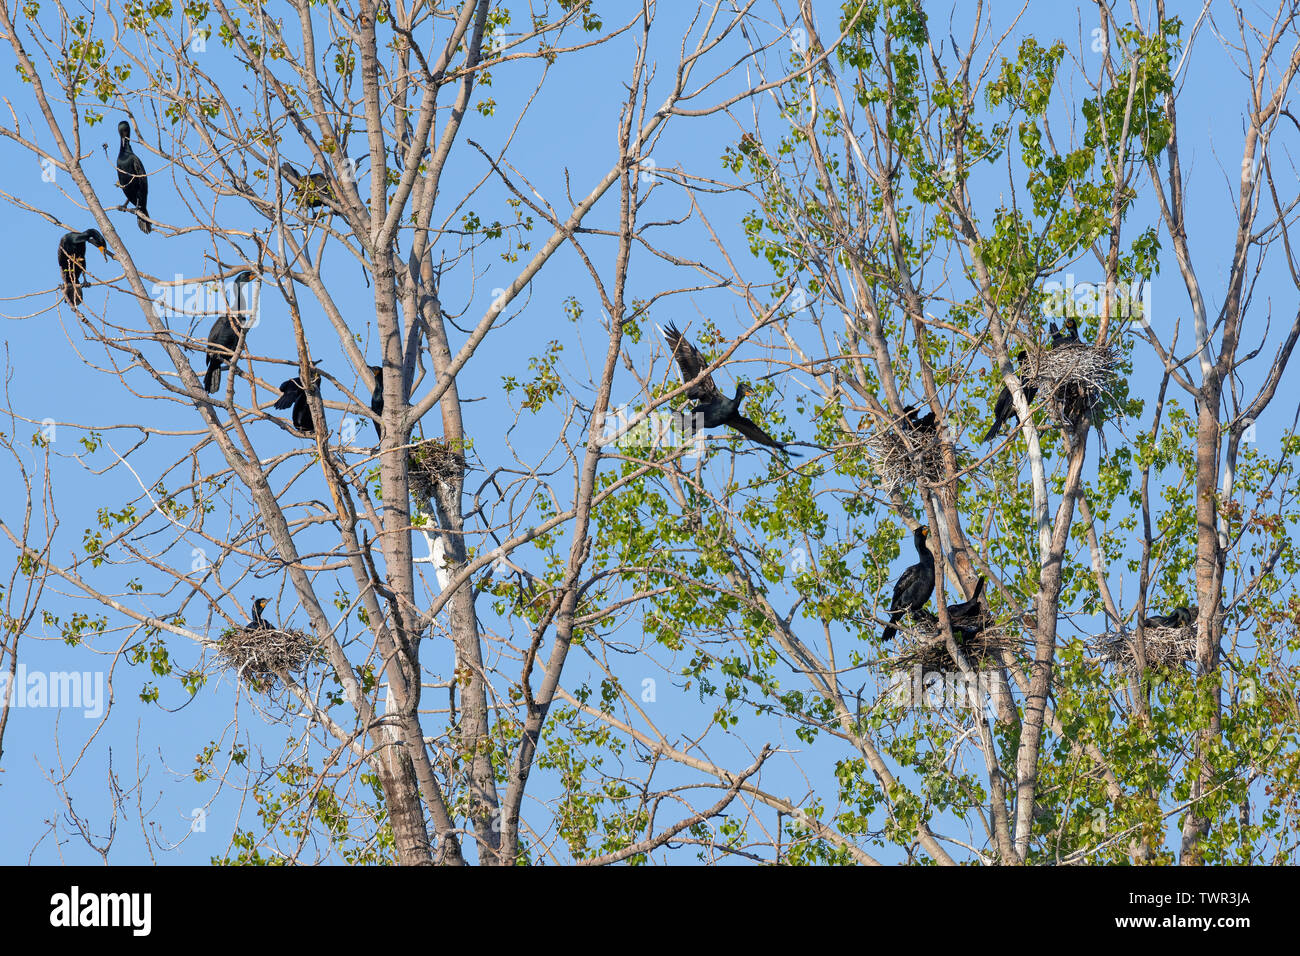 Double-crested cormorants nesting in a small rookery (Phalacrocorax auritus), Spring, Upper midwestern United States and Canada, by Dominique Braud/De Stock Photo